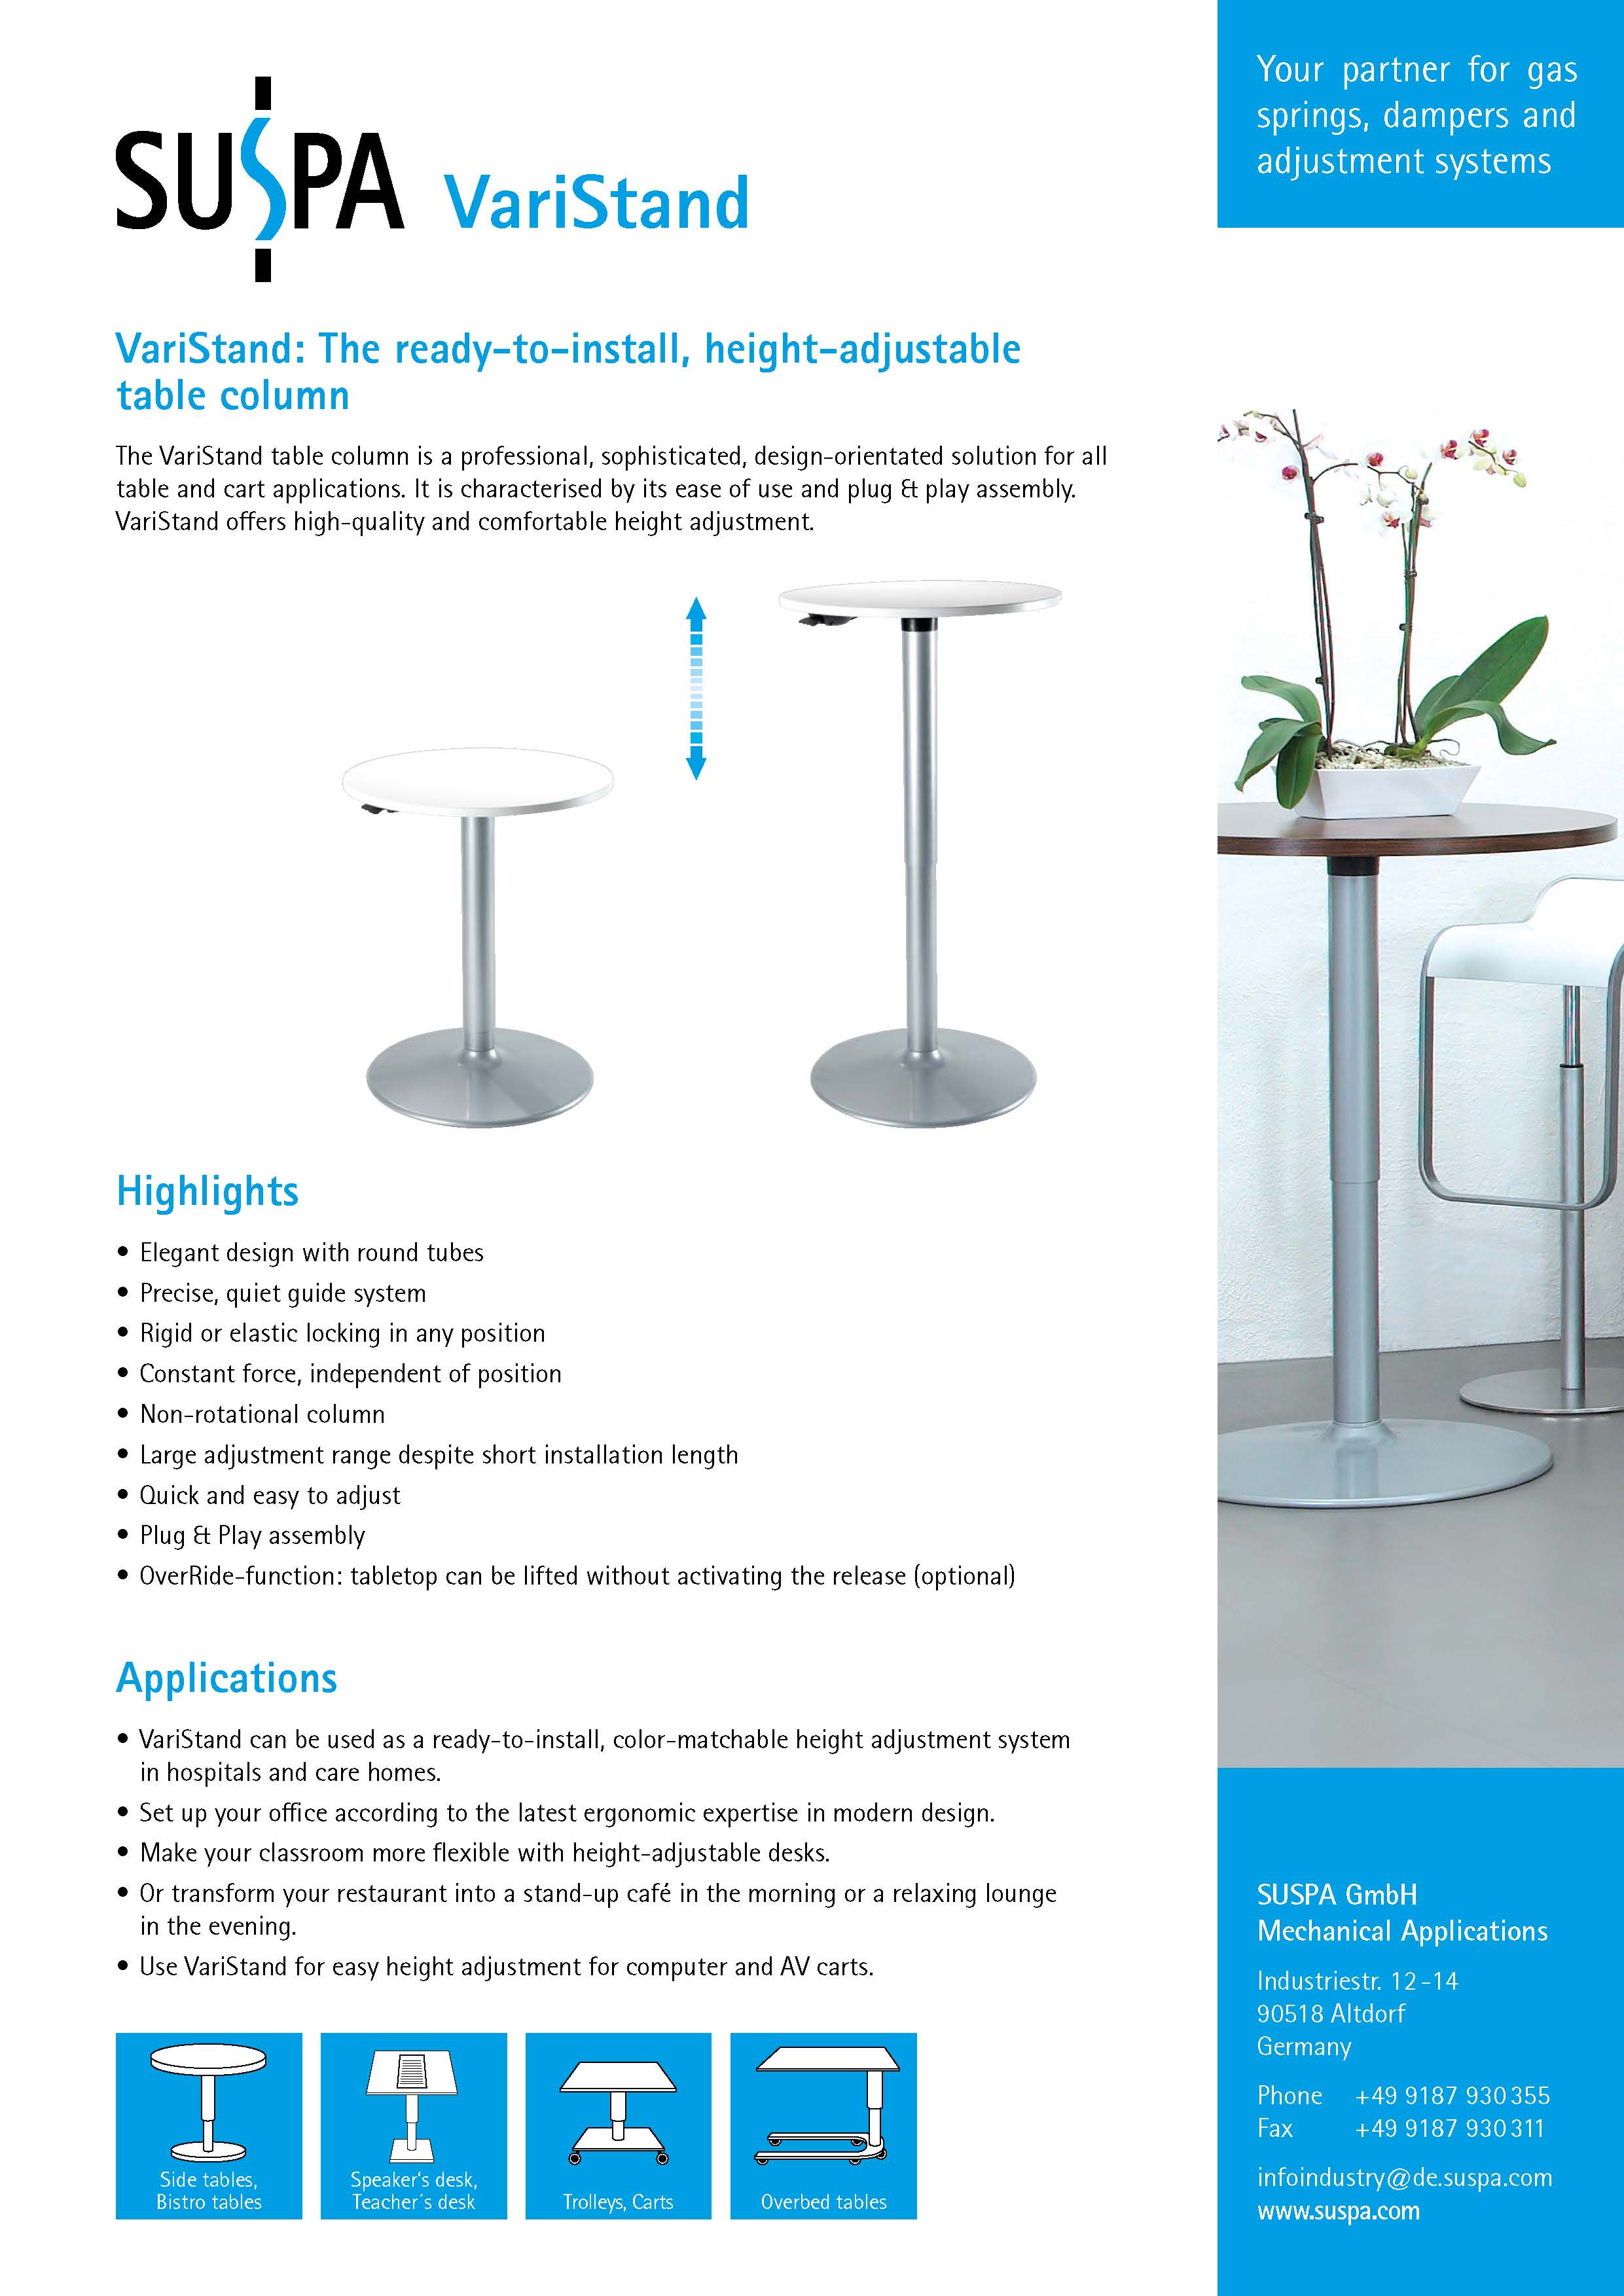 Suspa Varistand - Height adjustment with gas spring